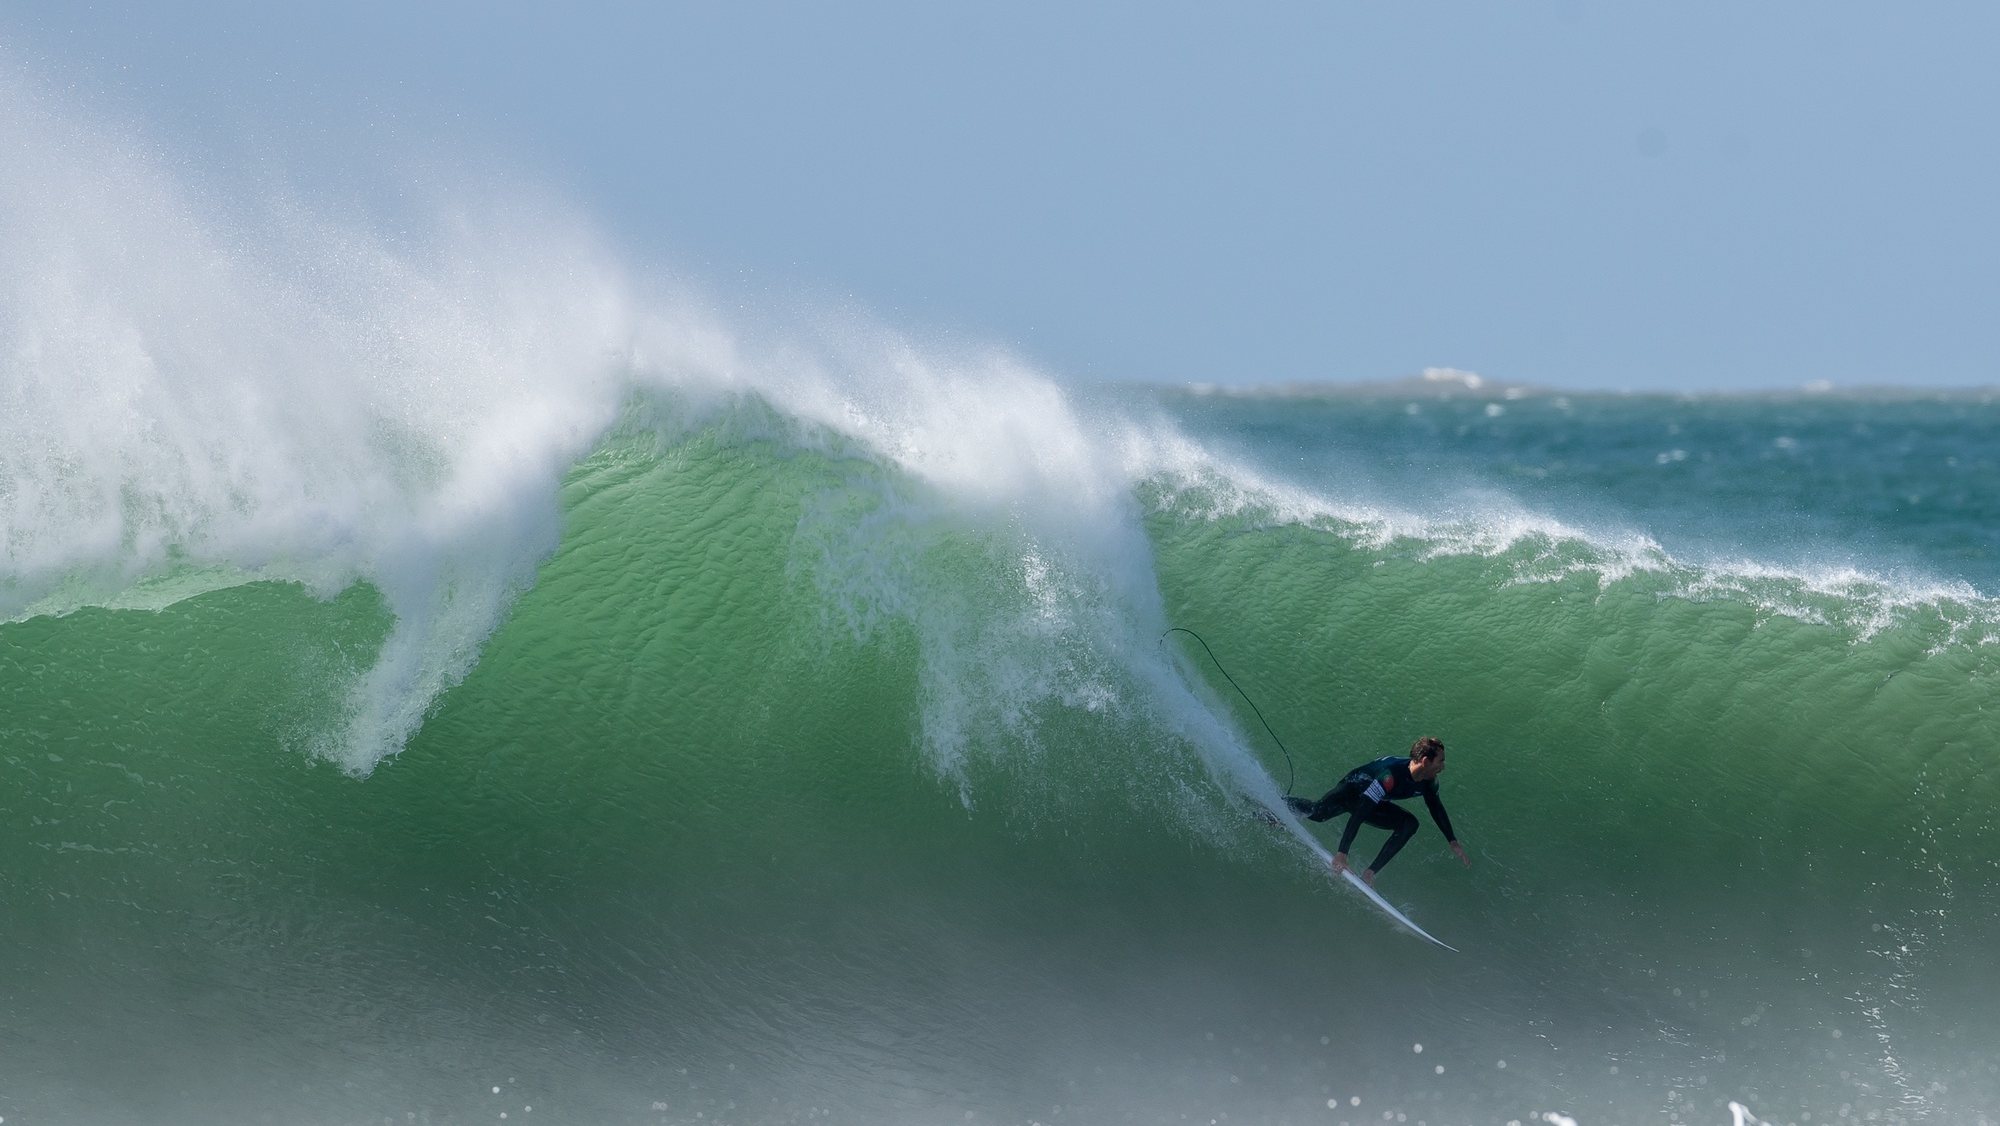 Portuguese surfer Frederico Morais in action during his opening round heat of the Meo Pro Portugal, the Portuguese leg of the World Surf League World Tour, at Supertubos beach, in Peniche, Portugal, 04 March 2022. JOSE SENA GOULAO/LUSA